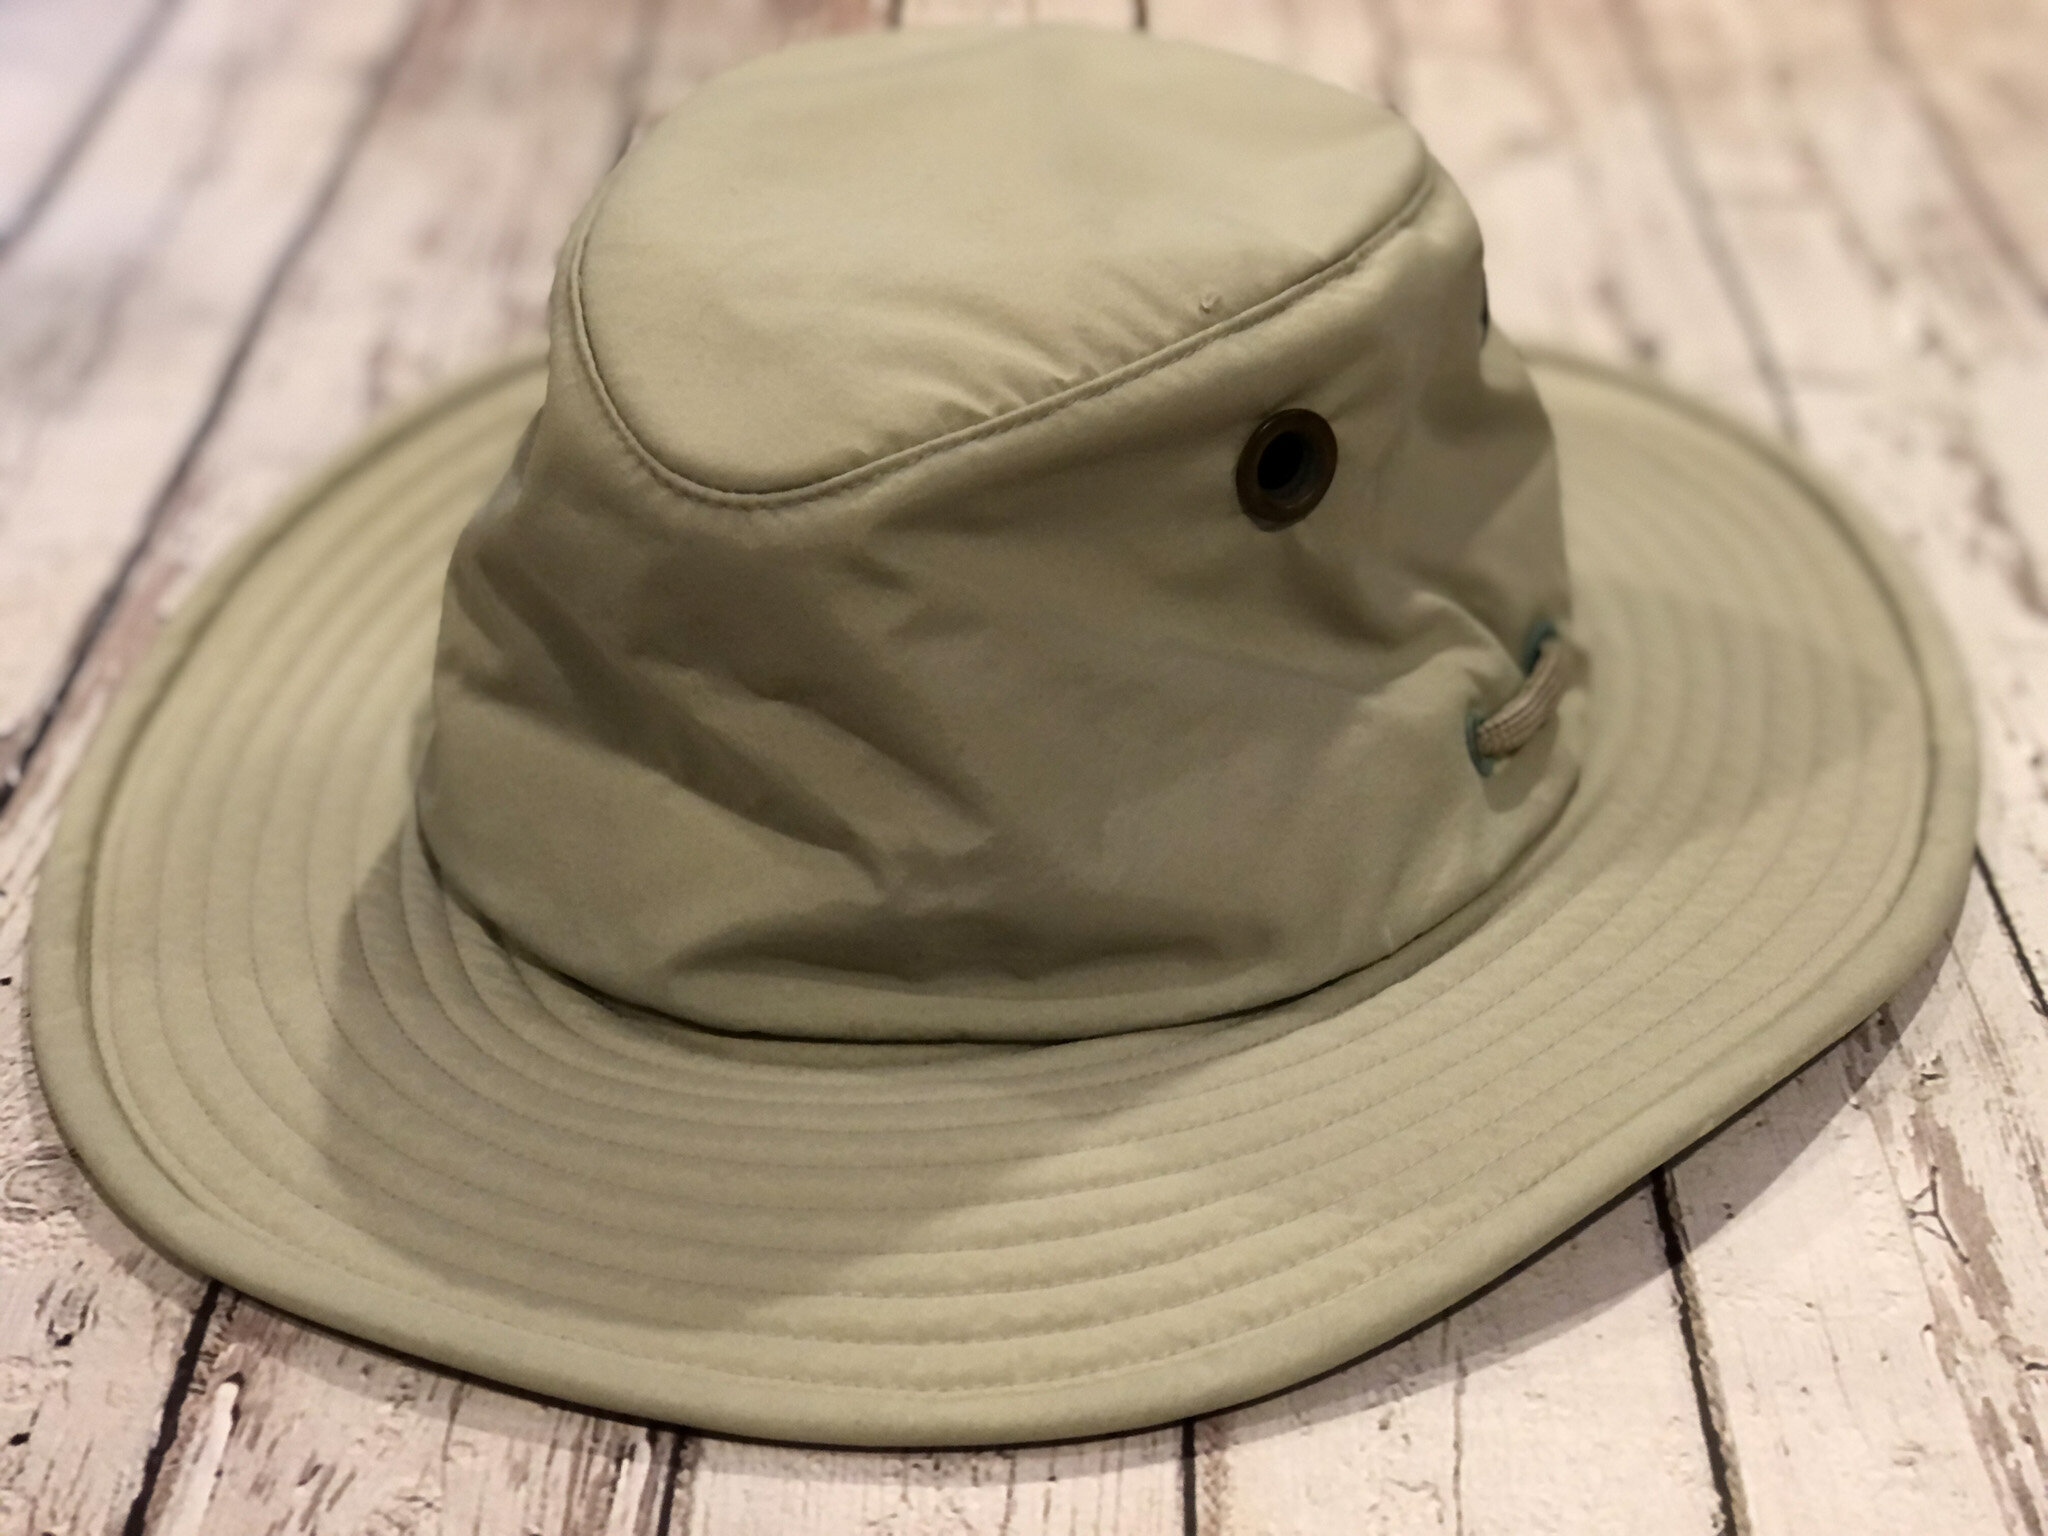 Unique gifts for travels: Tilley’s hat